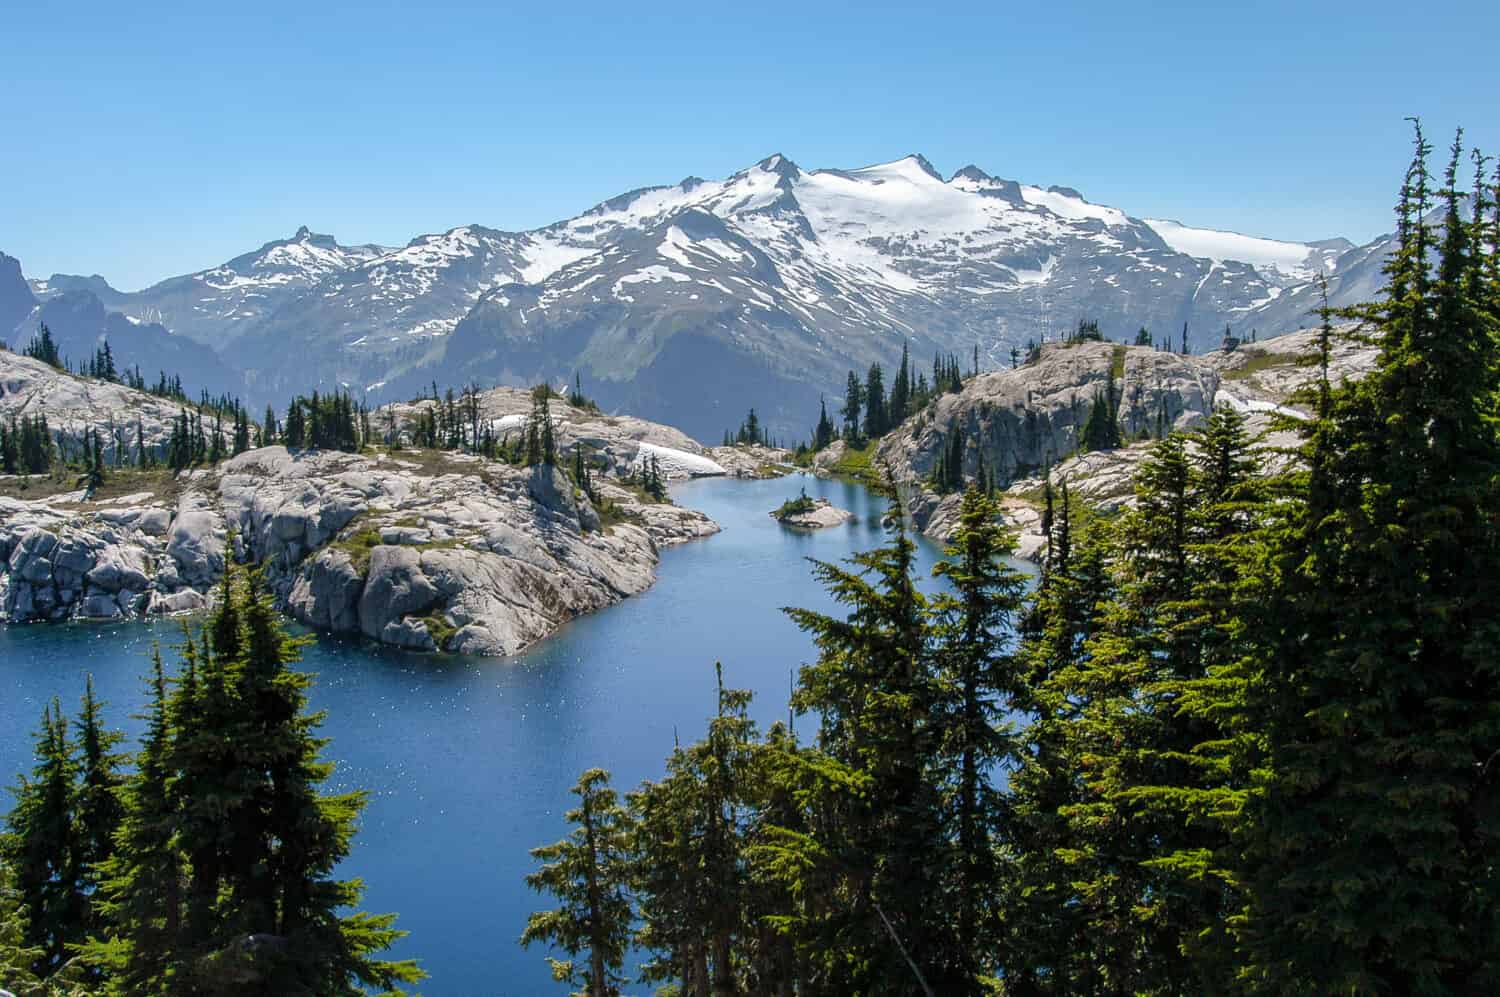 Picturesque sparkling Robin Lake surrounded by granite and trees with snow-capped Mt. Daniel towering in the background under a cloudless blue sky in the Alpine Lakes Wilderness, Washington State, USA